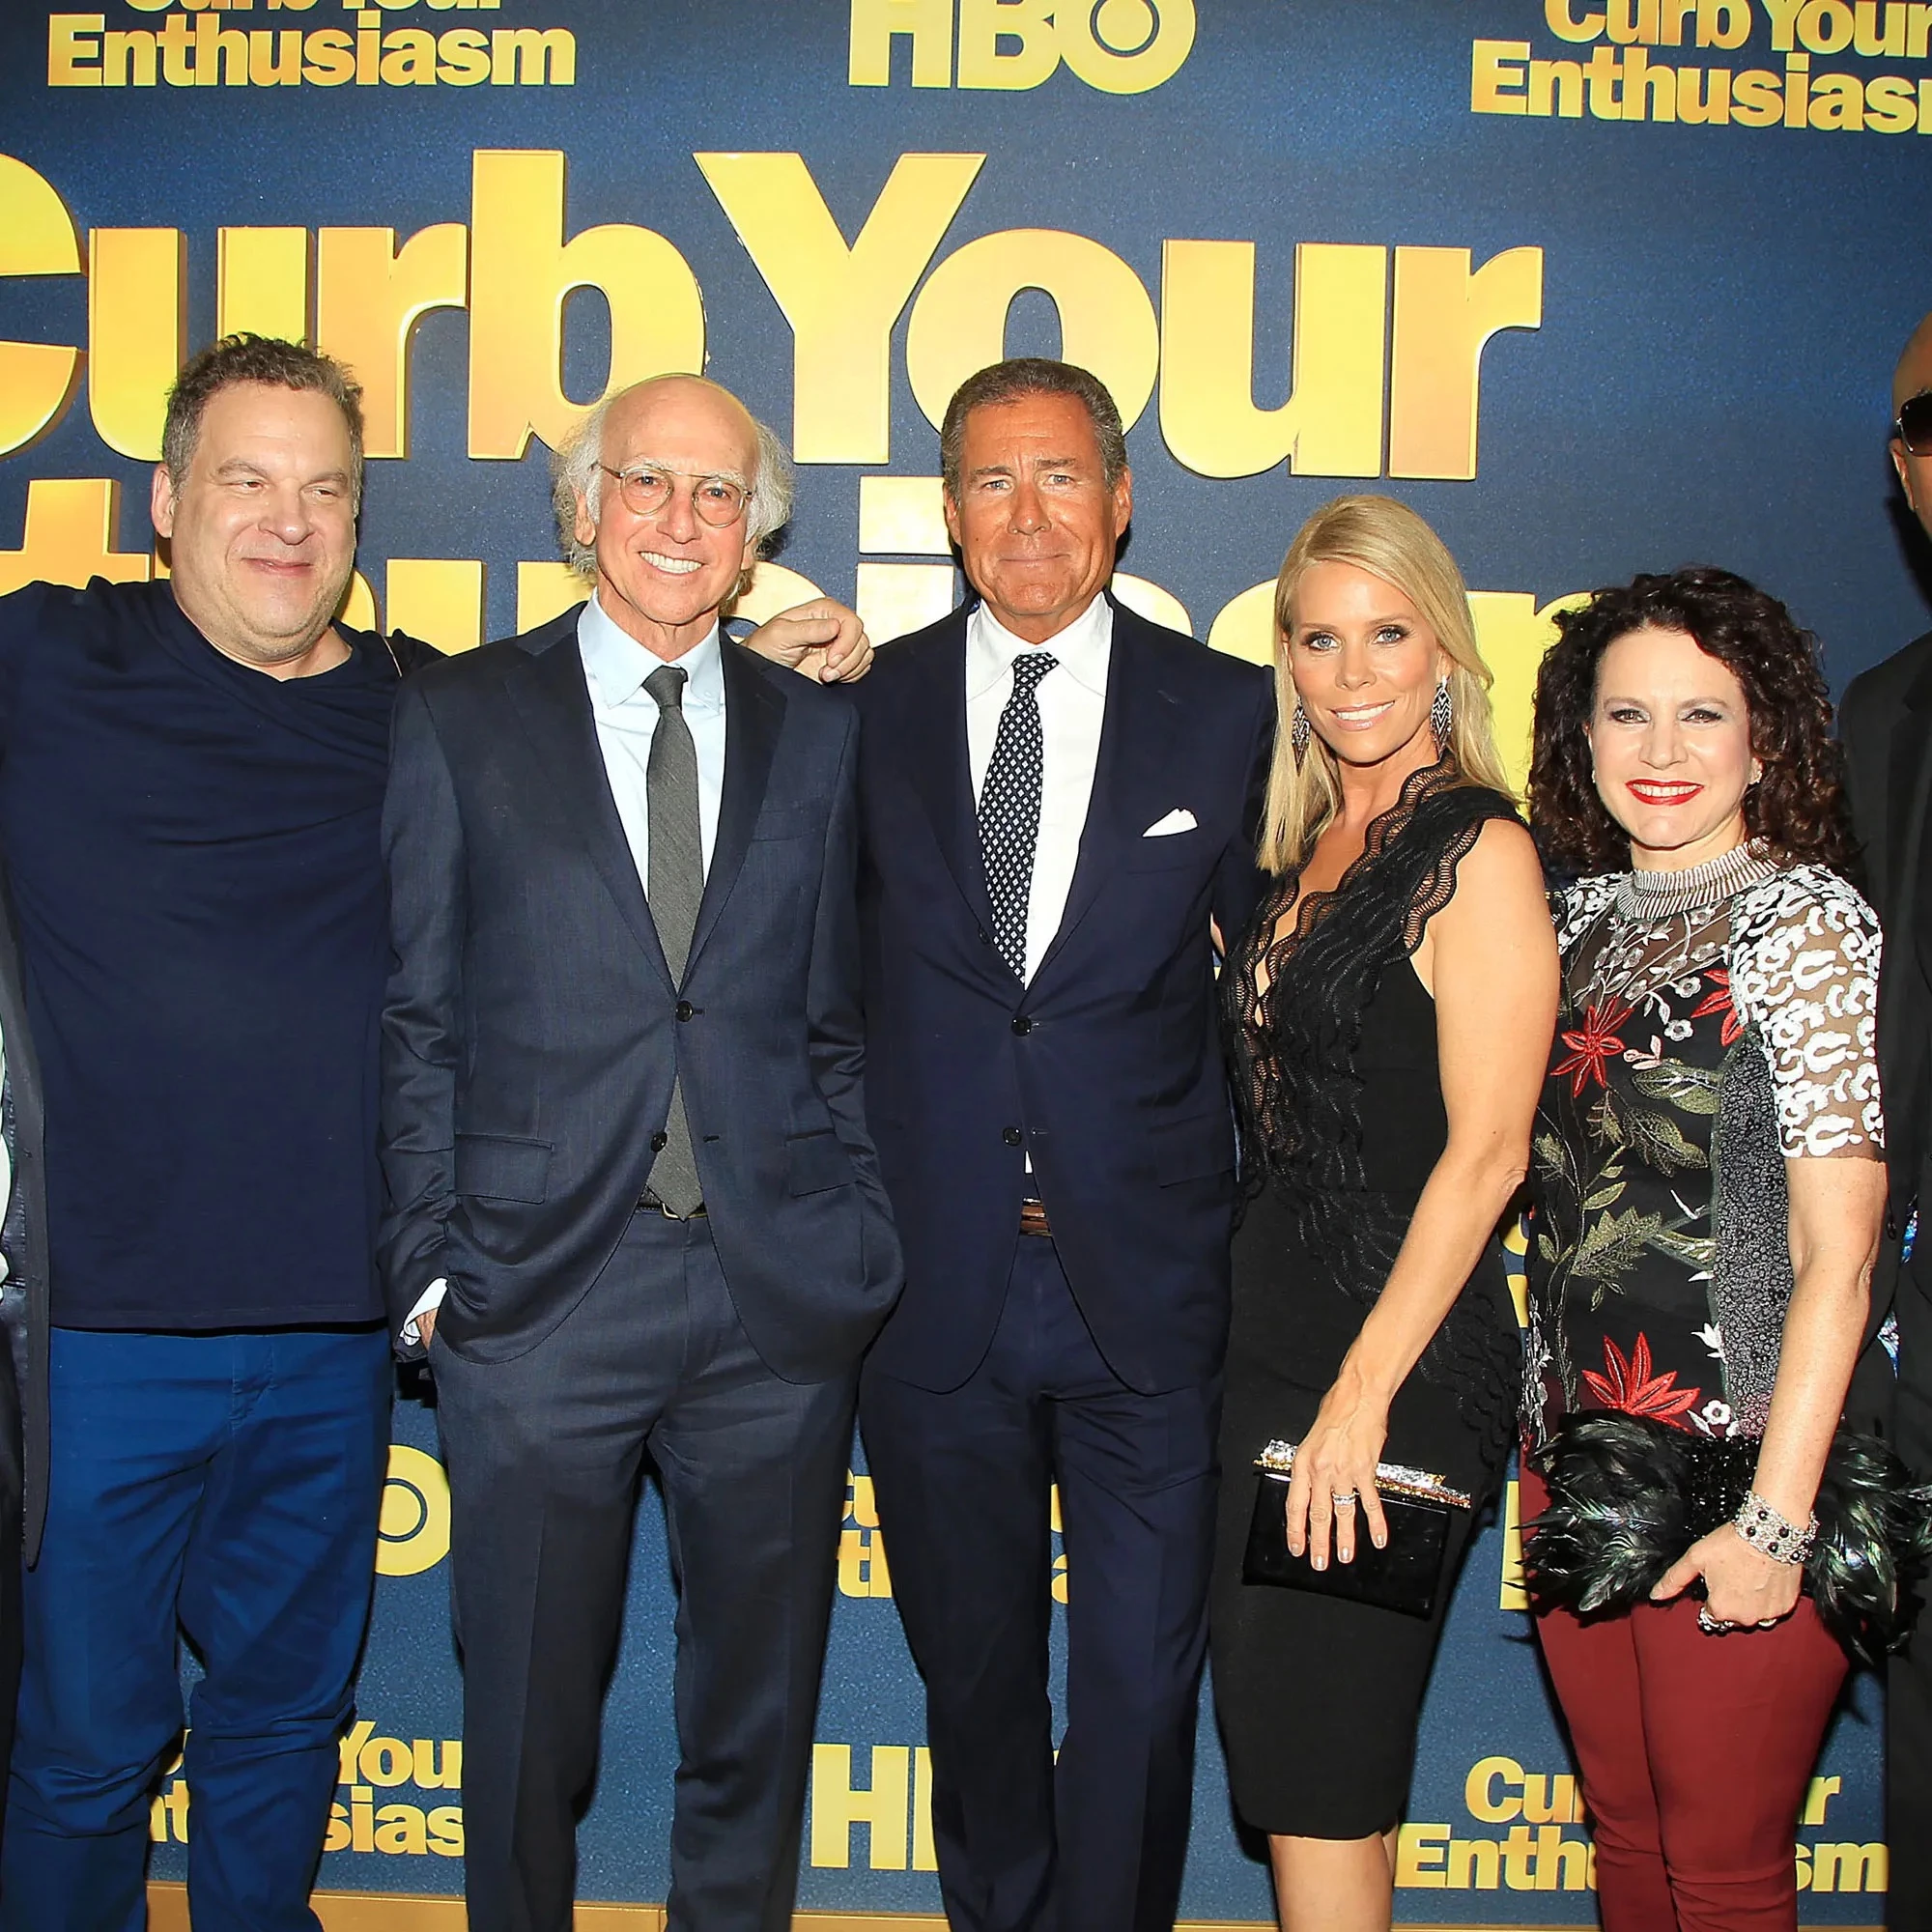 Curb Your Enthusiasm Season 12 Cast: Who Is Coming Back?